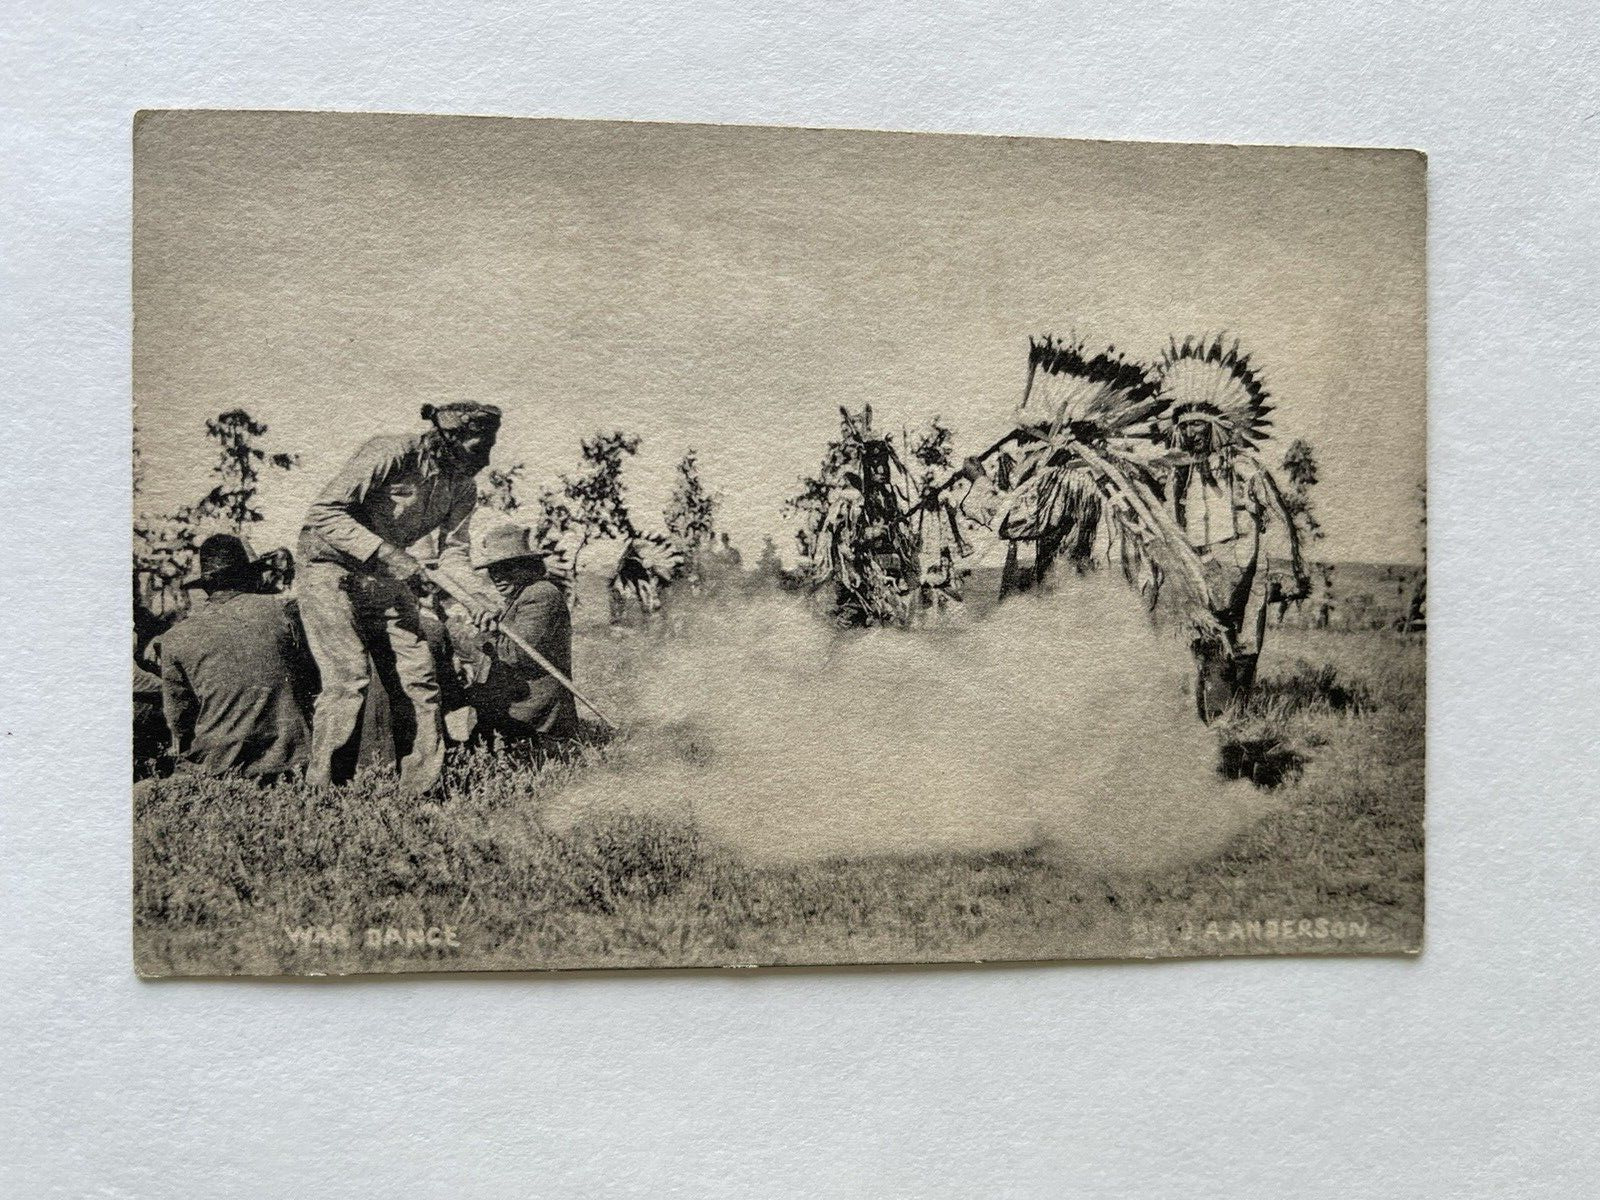 Antique 1900s Native Americans WAR DANCE Post Card Photographer ANDERSON